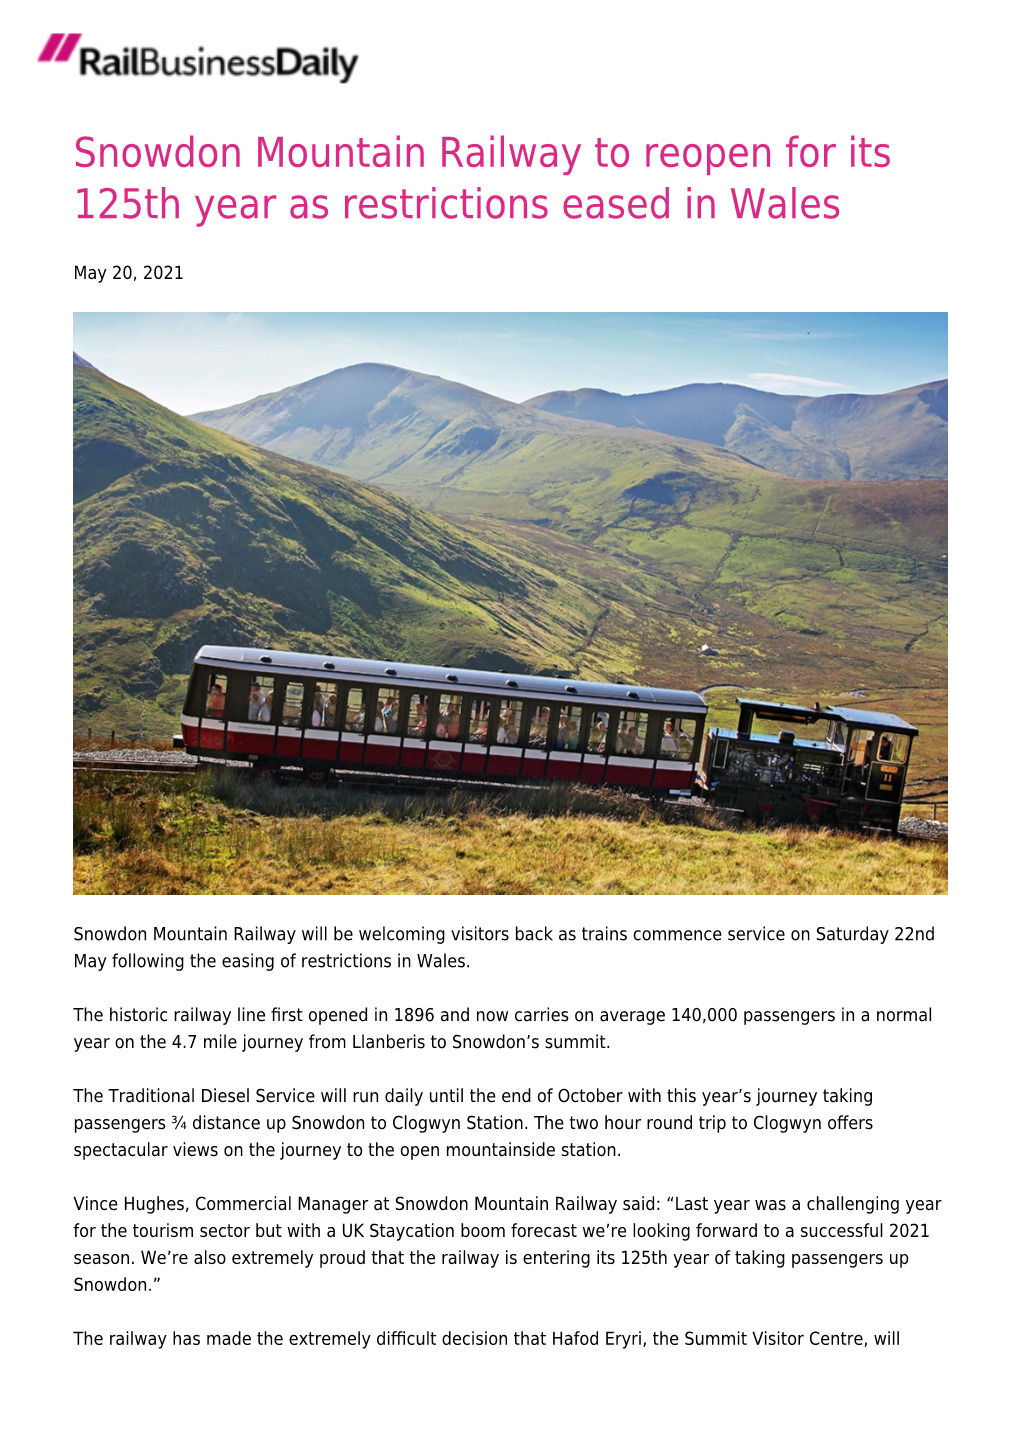 Snowdon Mountain Railway to Reopen for Its 125Th Year As Restrictions Eased in Wales